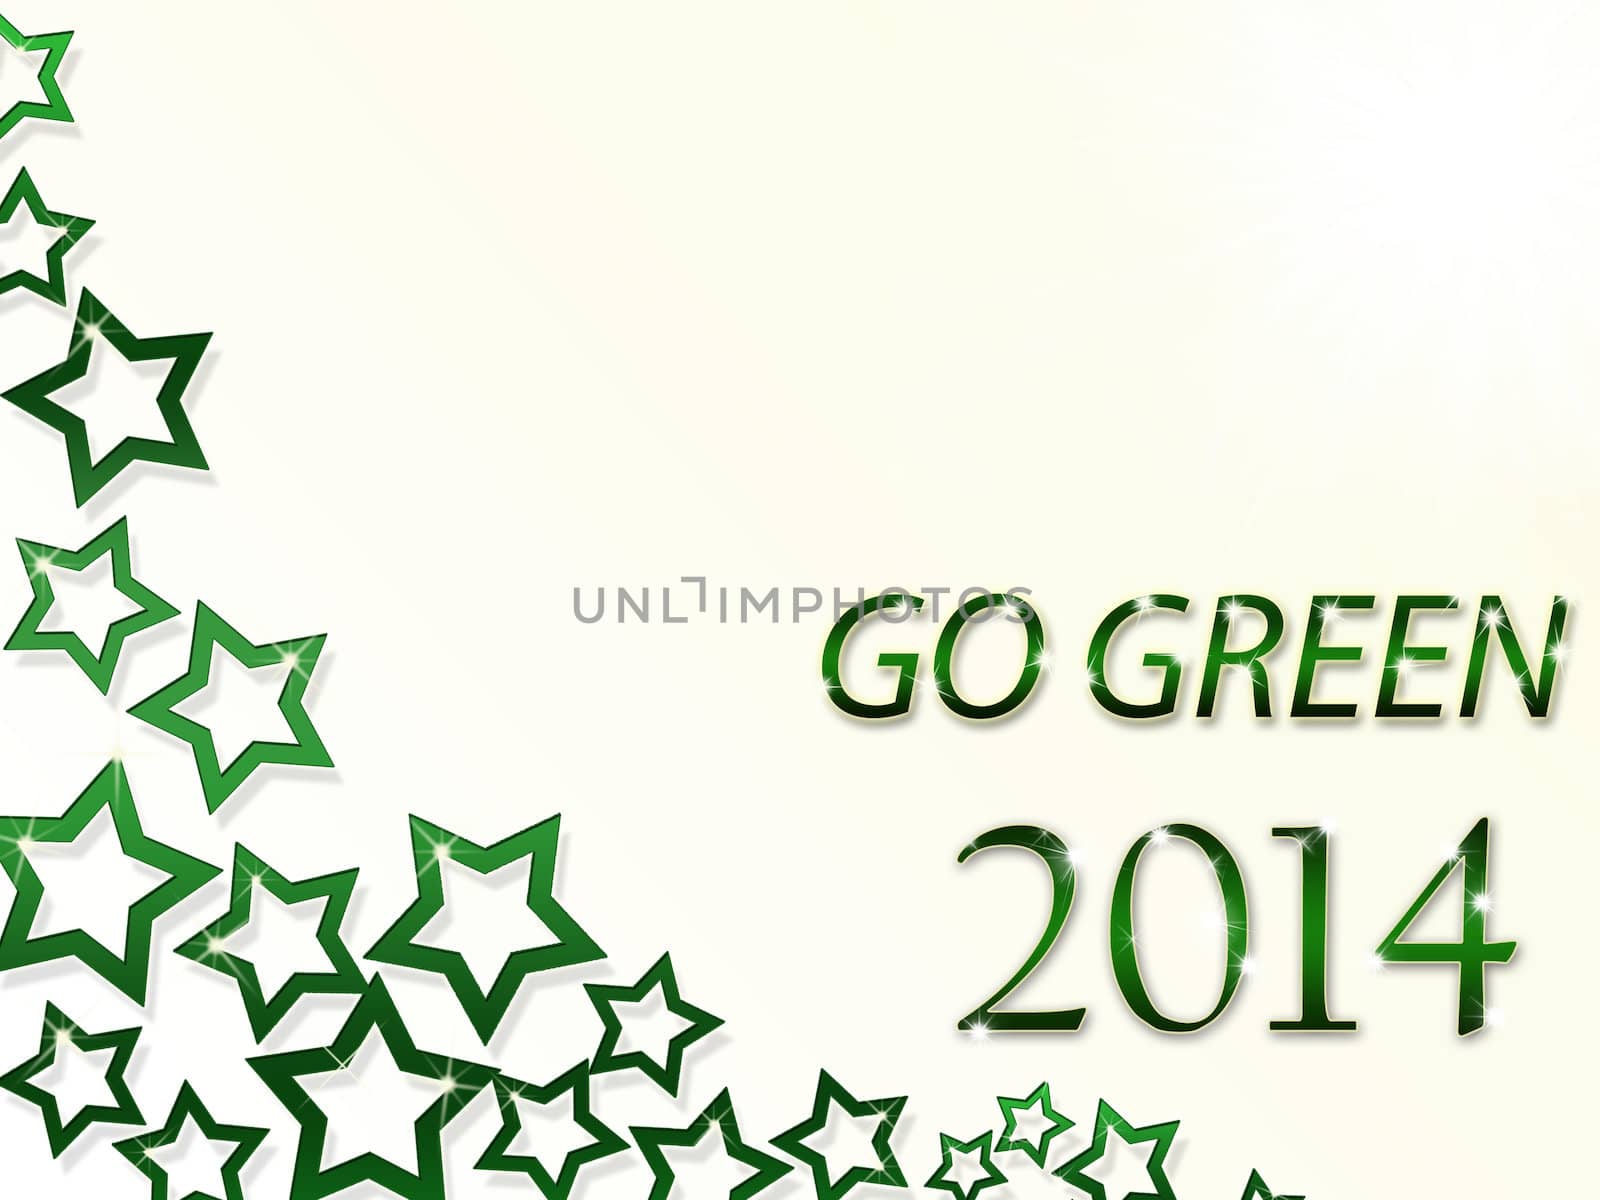 2014 Go Green Stars ecology concept by Dddaca